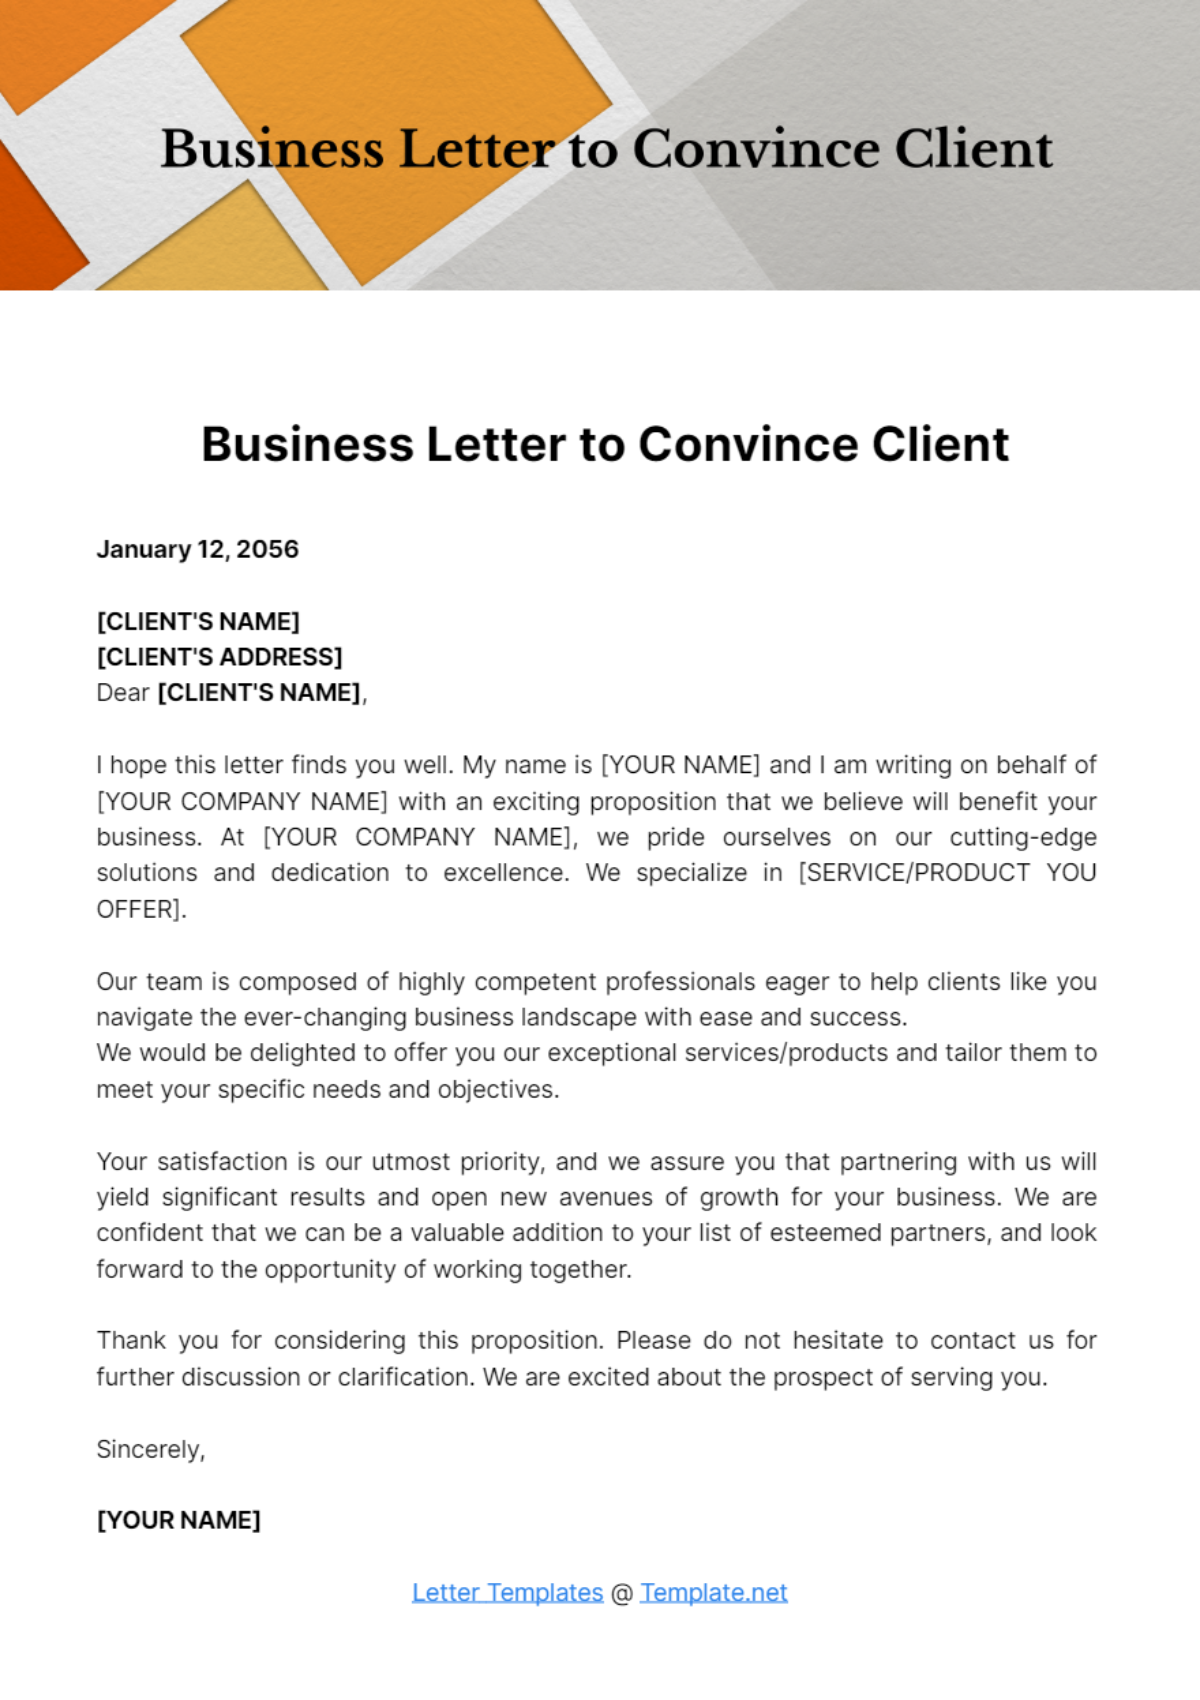 Business Letter to Convince Client Template